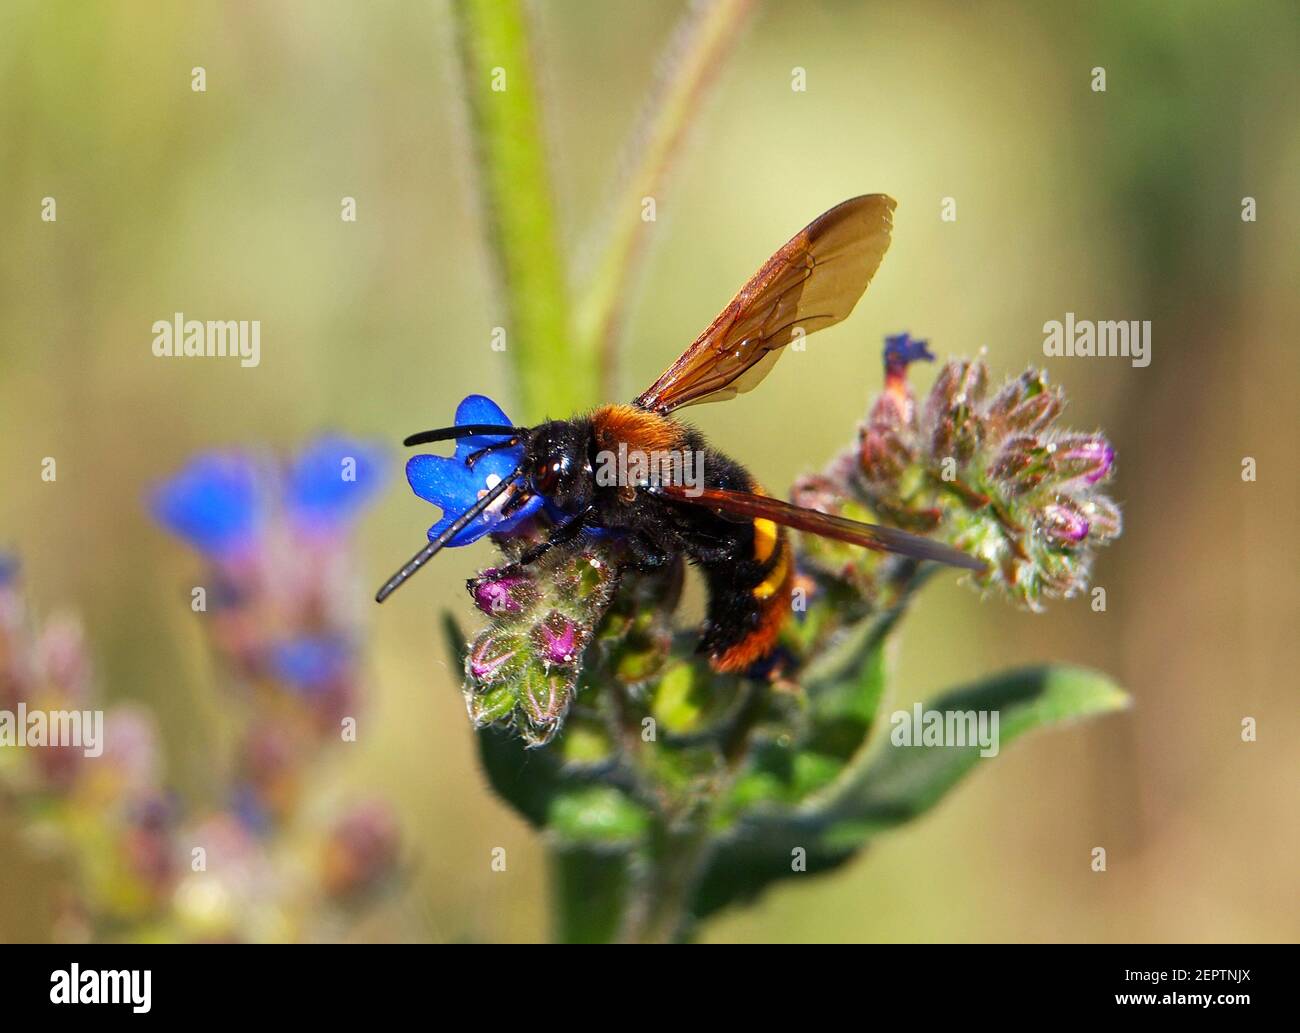 Blue flowers of the common bugloss or alkanet, Anchusa officinalis, and mammoth wasp on it, Megascolia maculate Stock Photo